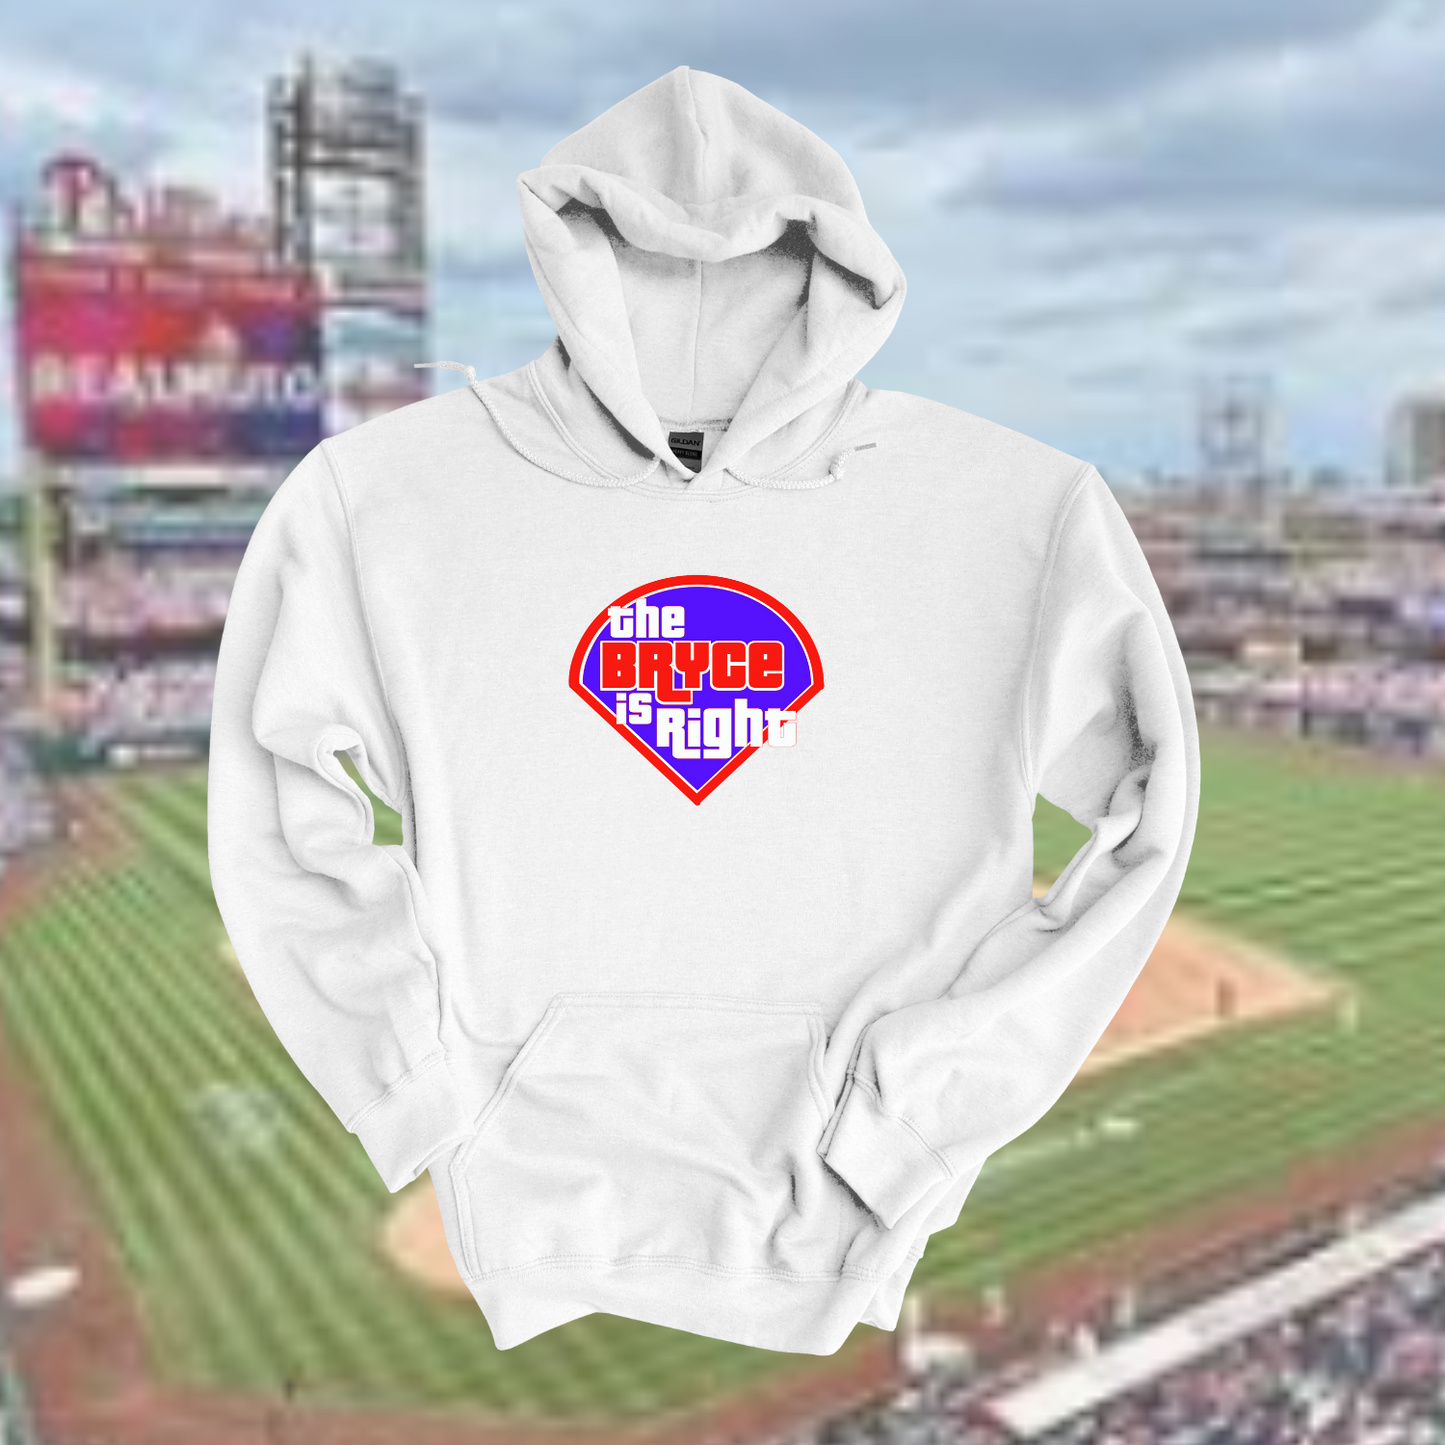 The Bryce is Right! Hooded Sweatshirt